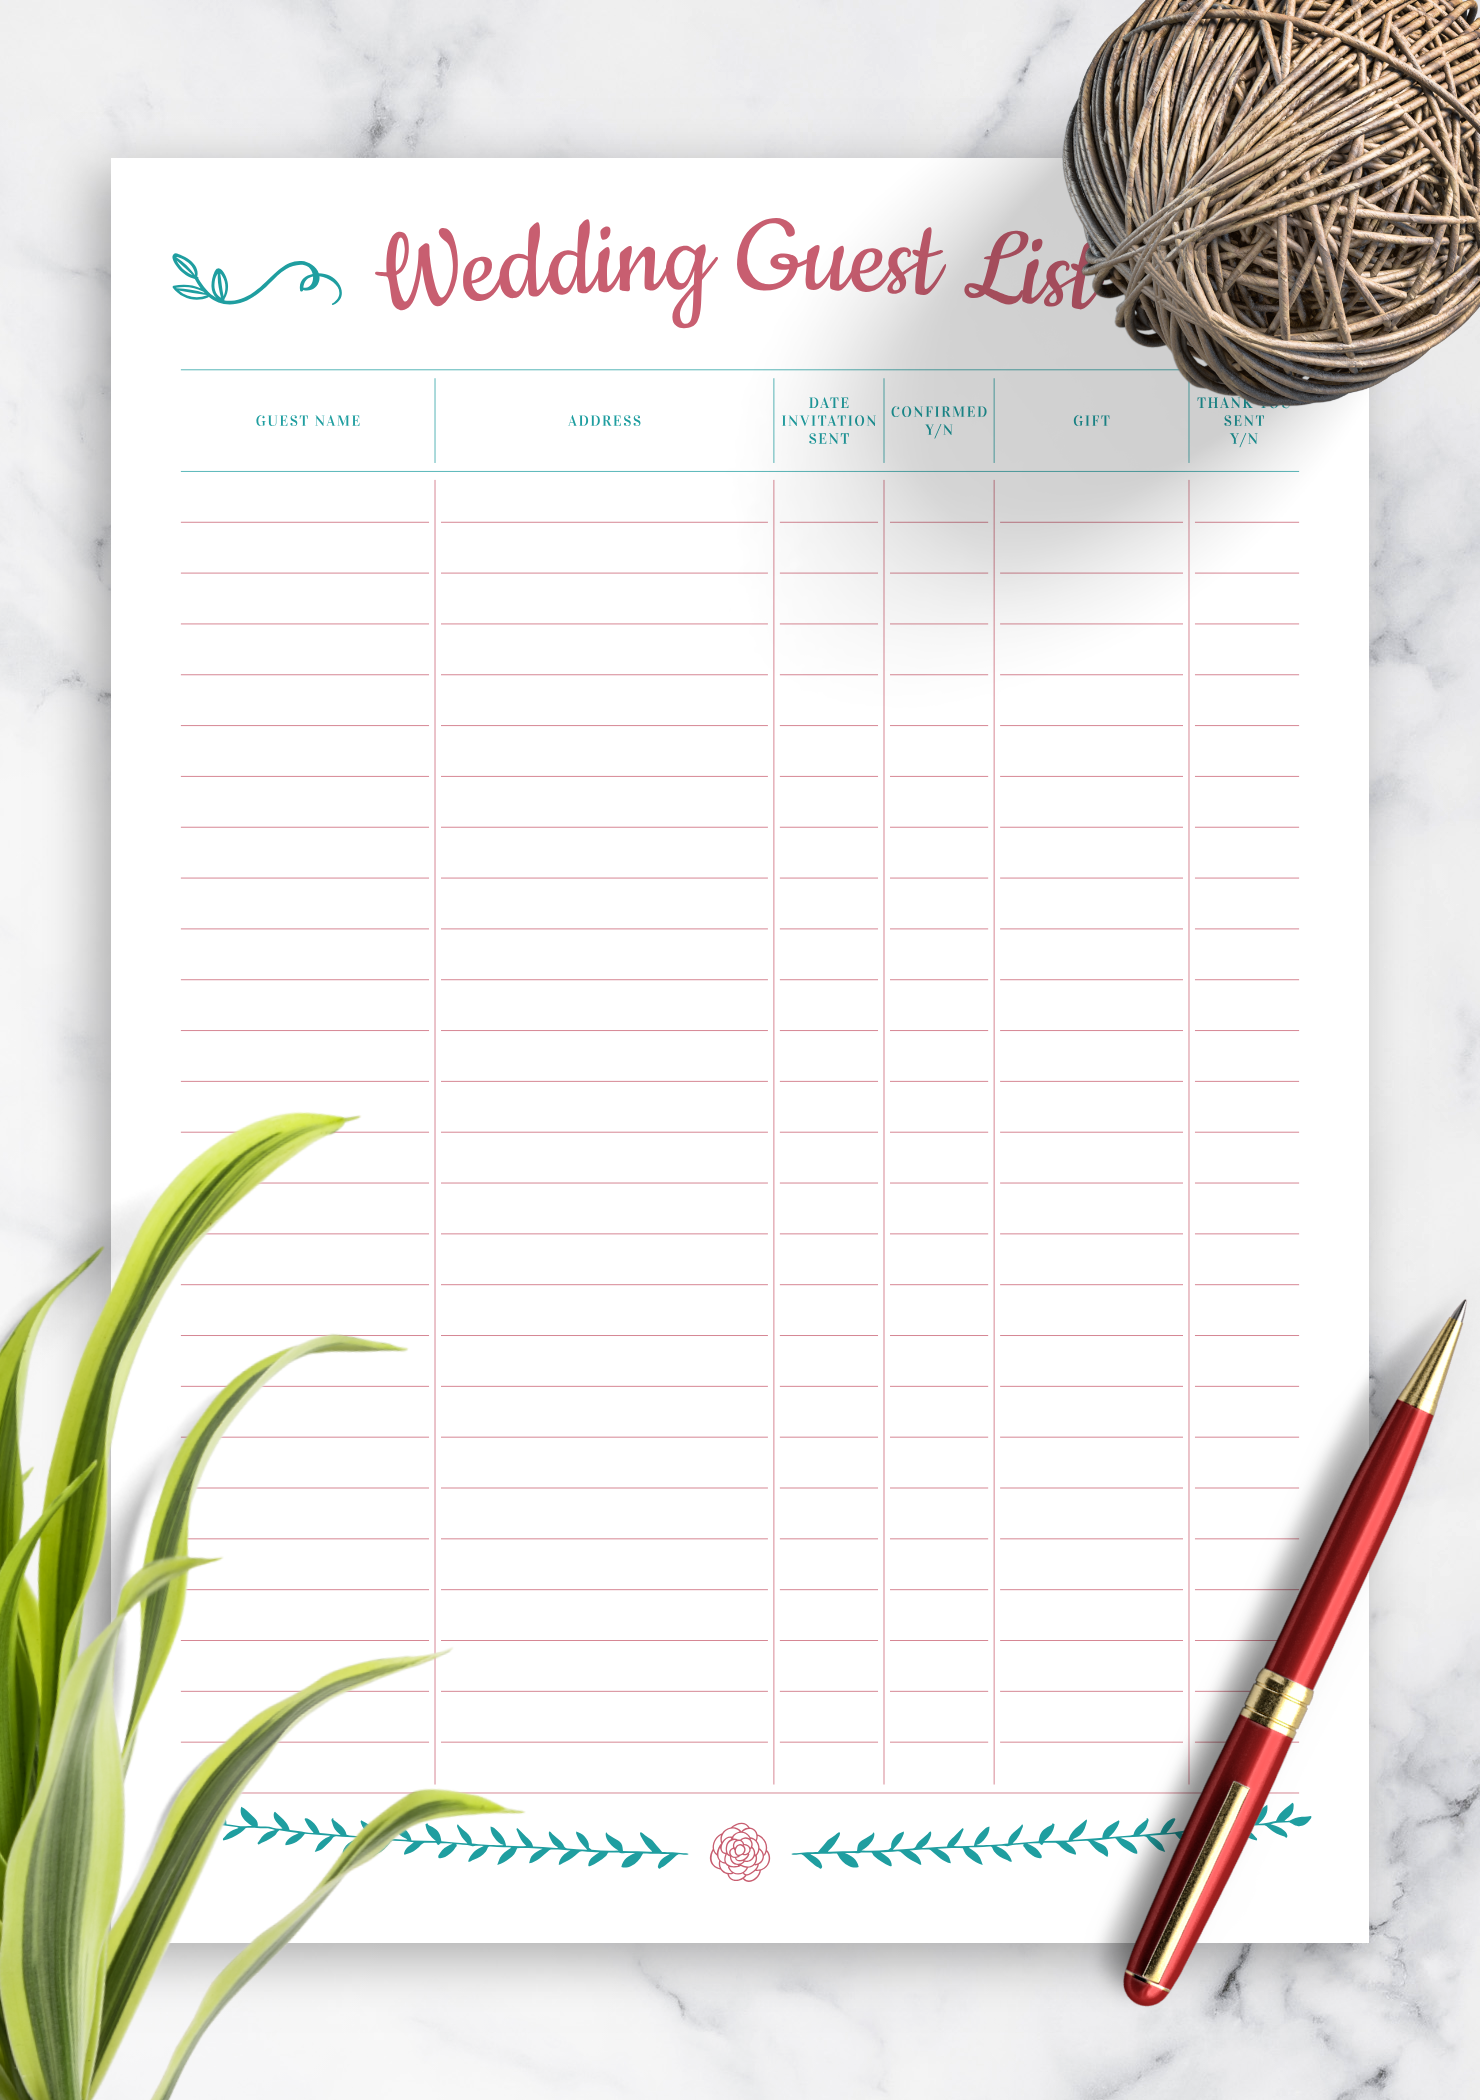 Download Printable Wedding Guest List with Gift Section PDF